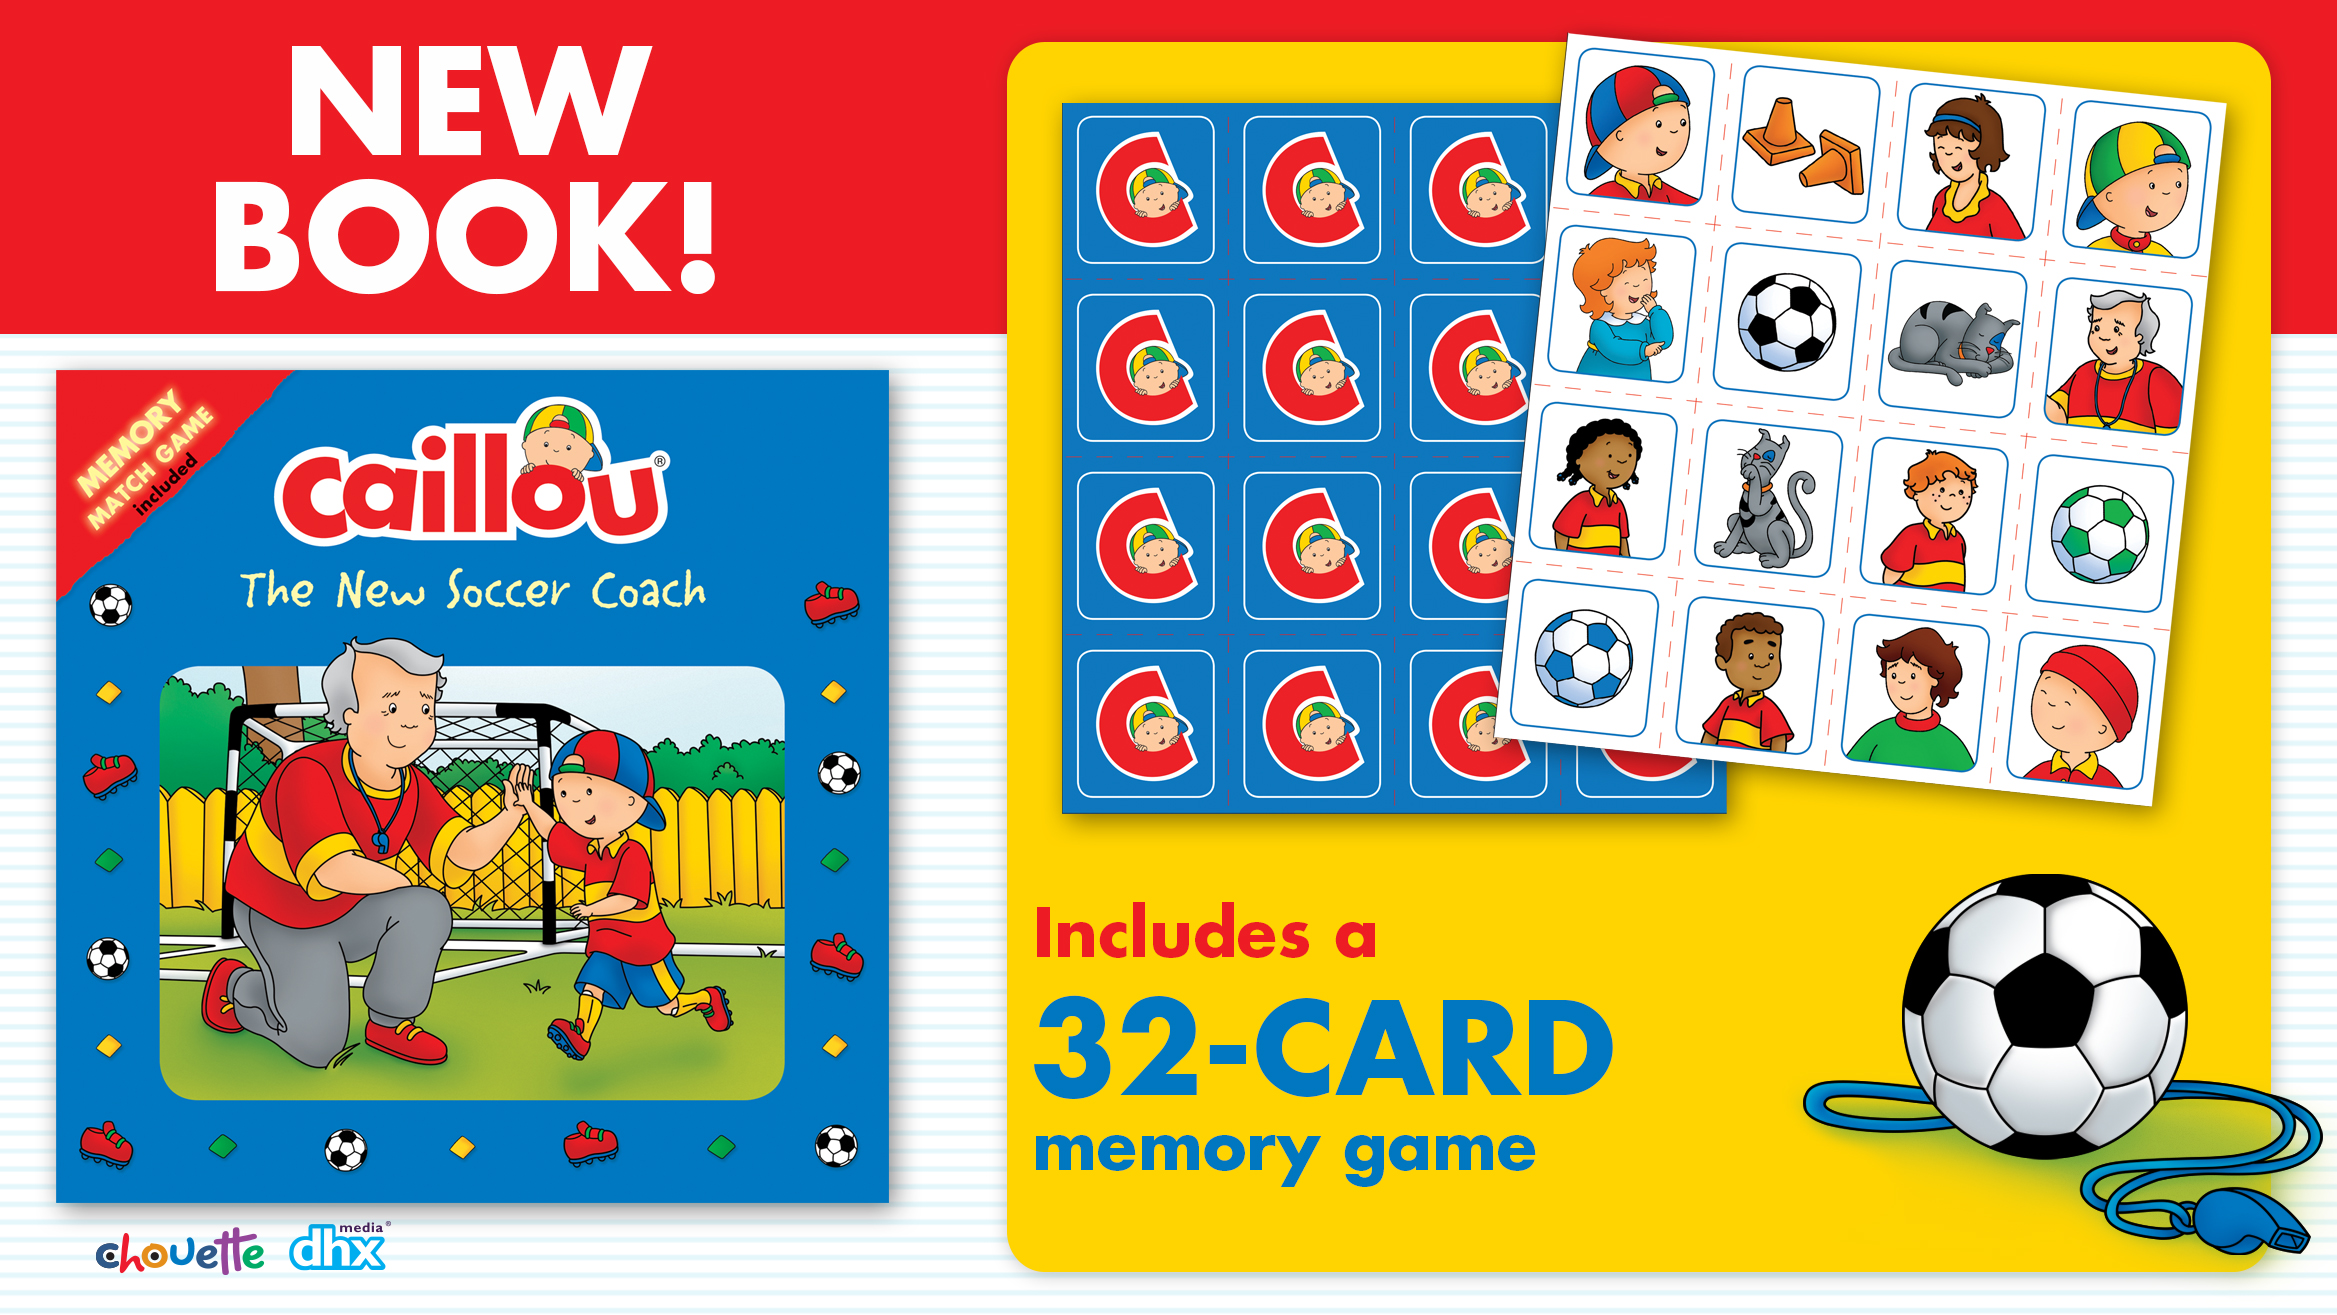 Caillou book cover and Memory Card game